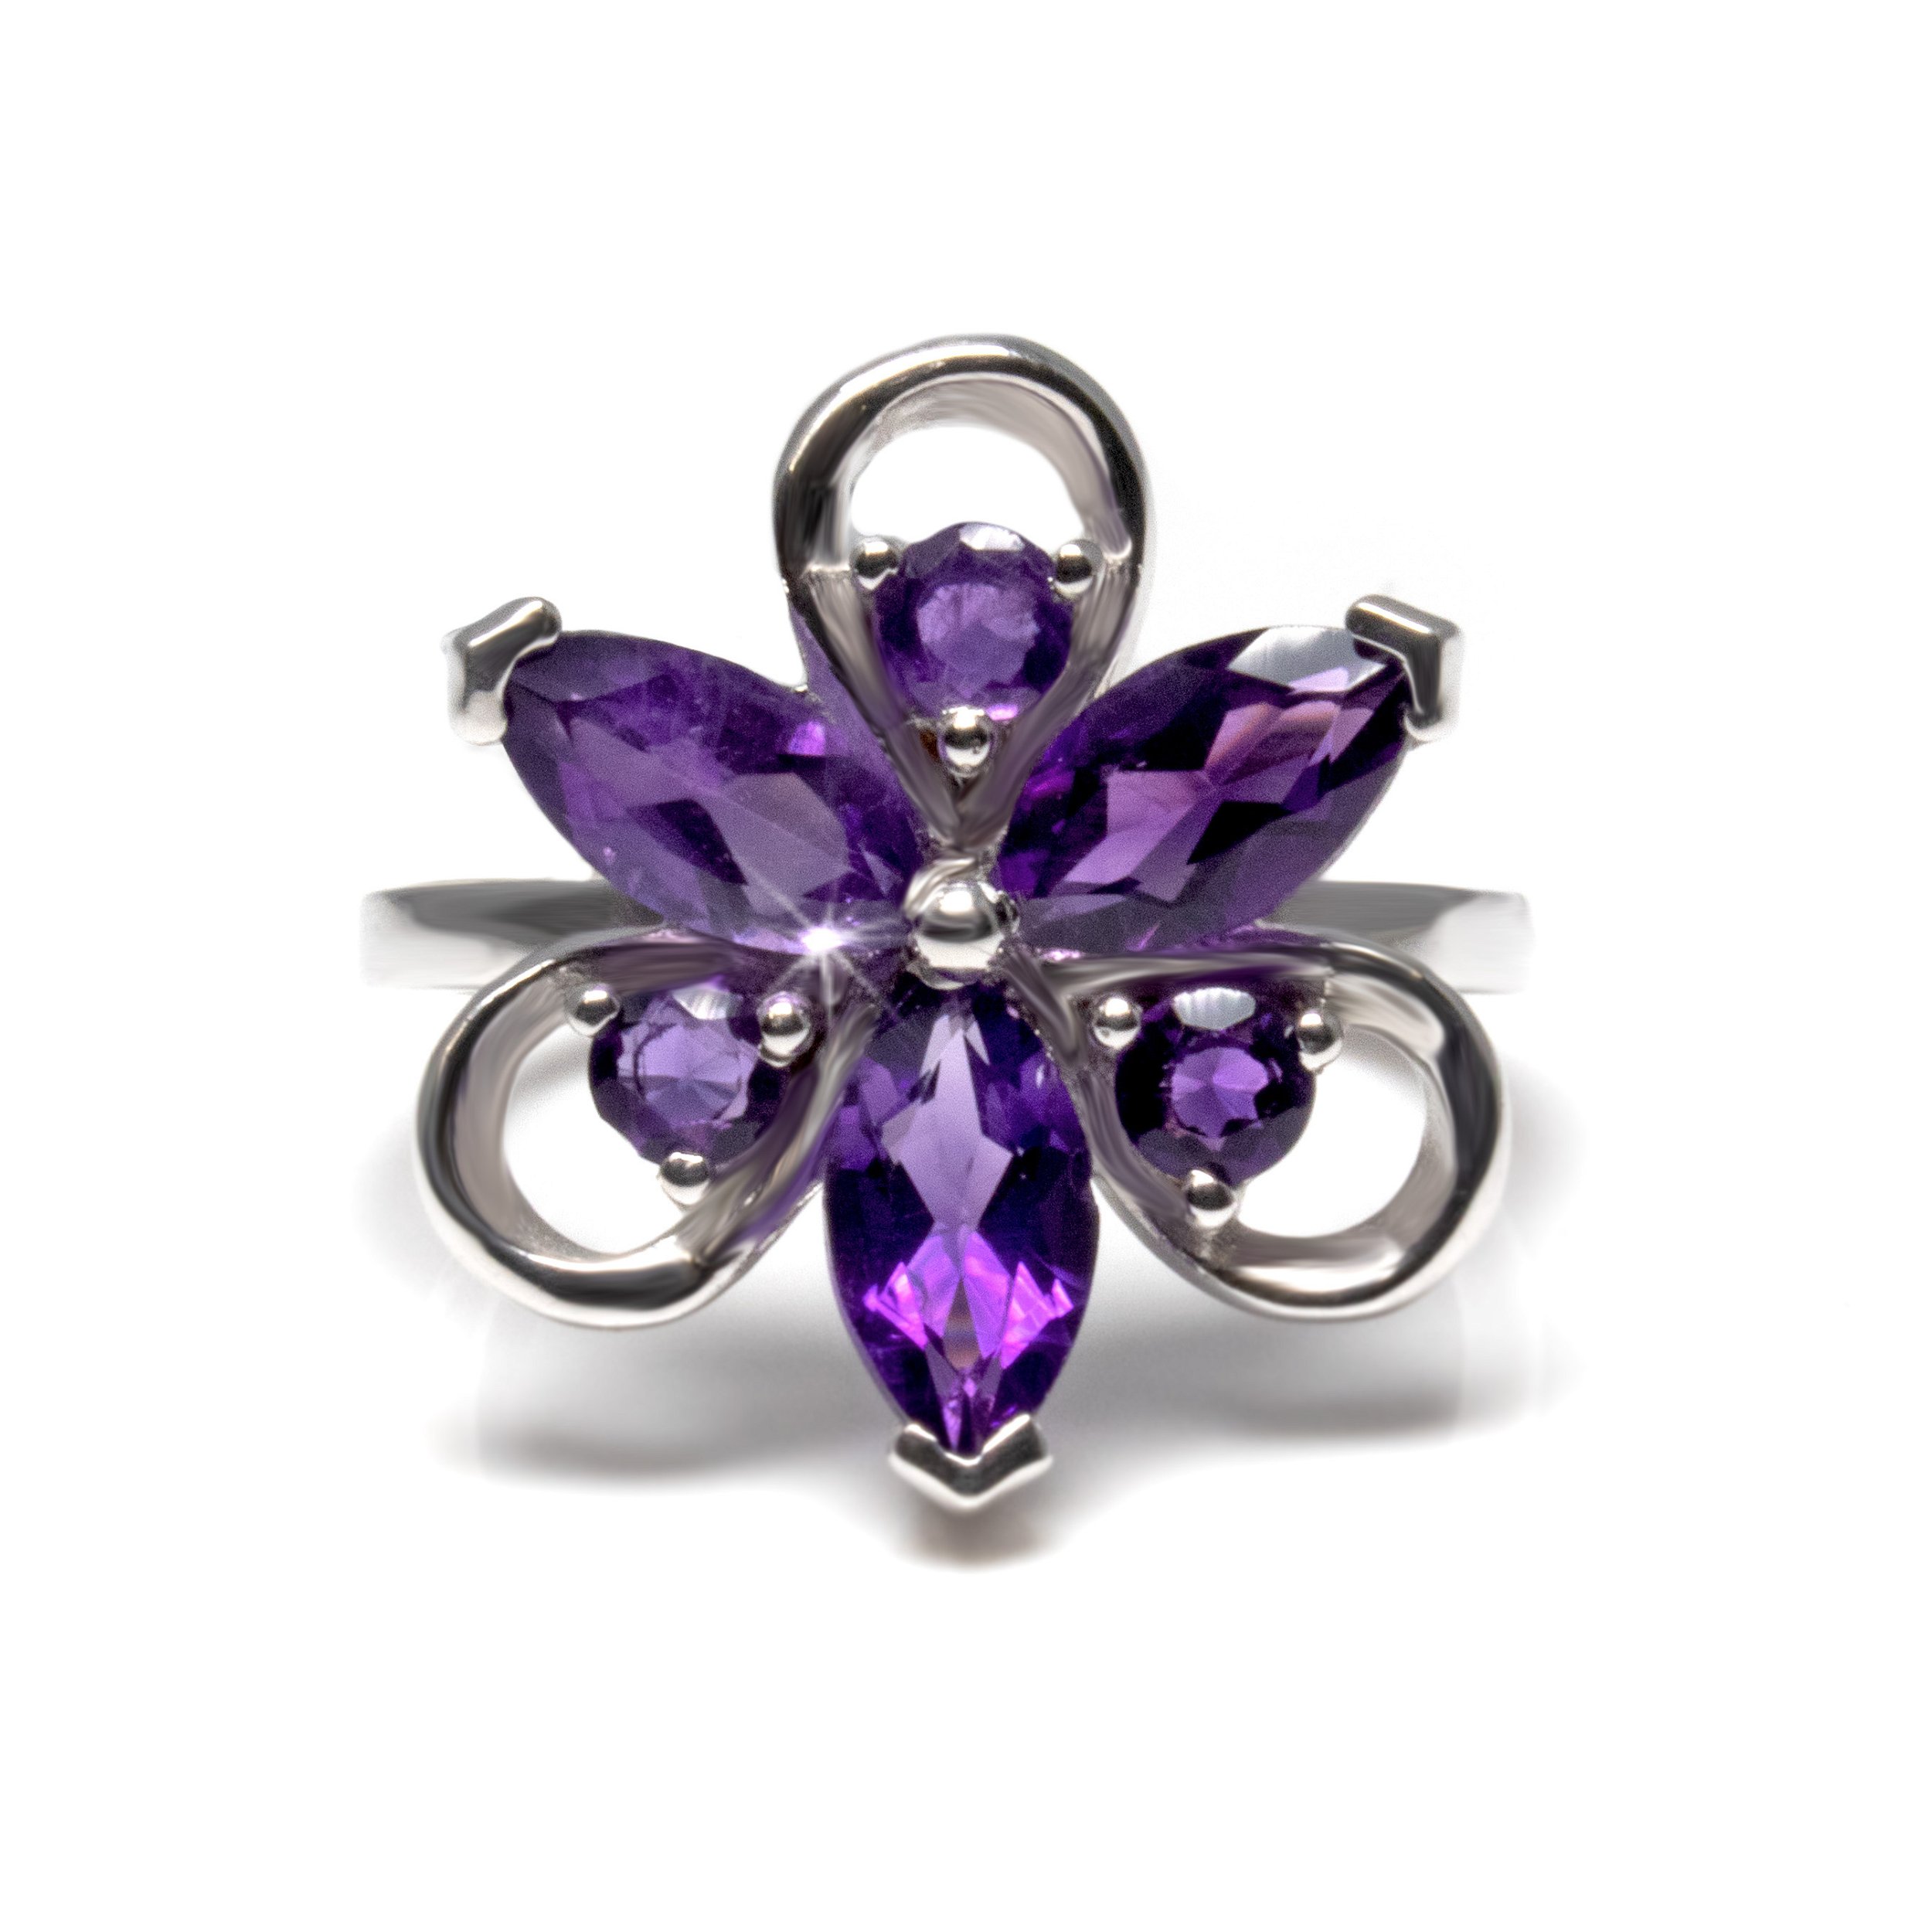 Faceted Amethyst Ring Size 8 - with 3 Faceted Sharp Ovals & 3 Faceted Rounds With Silver Loop Detail - Water Lily Shape - Prong Set